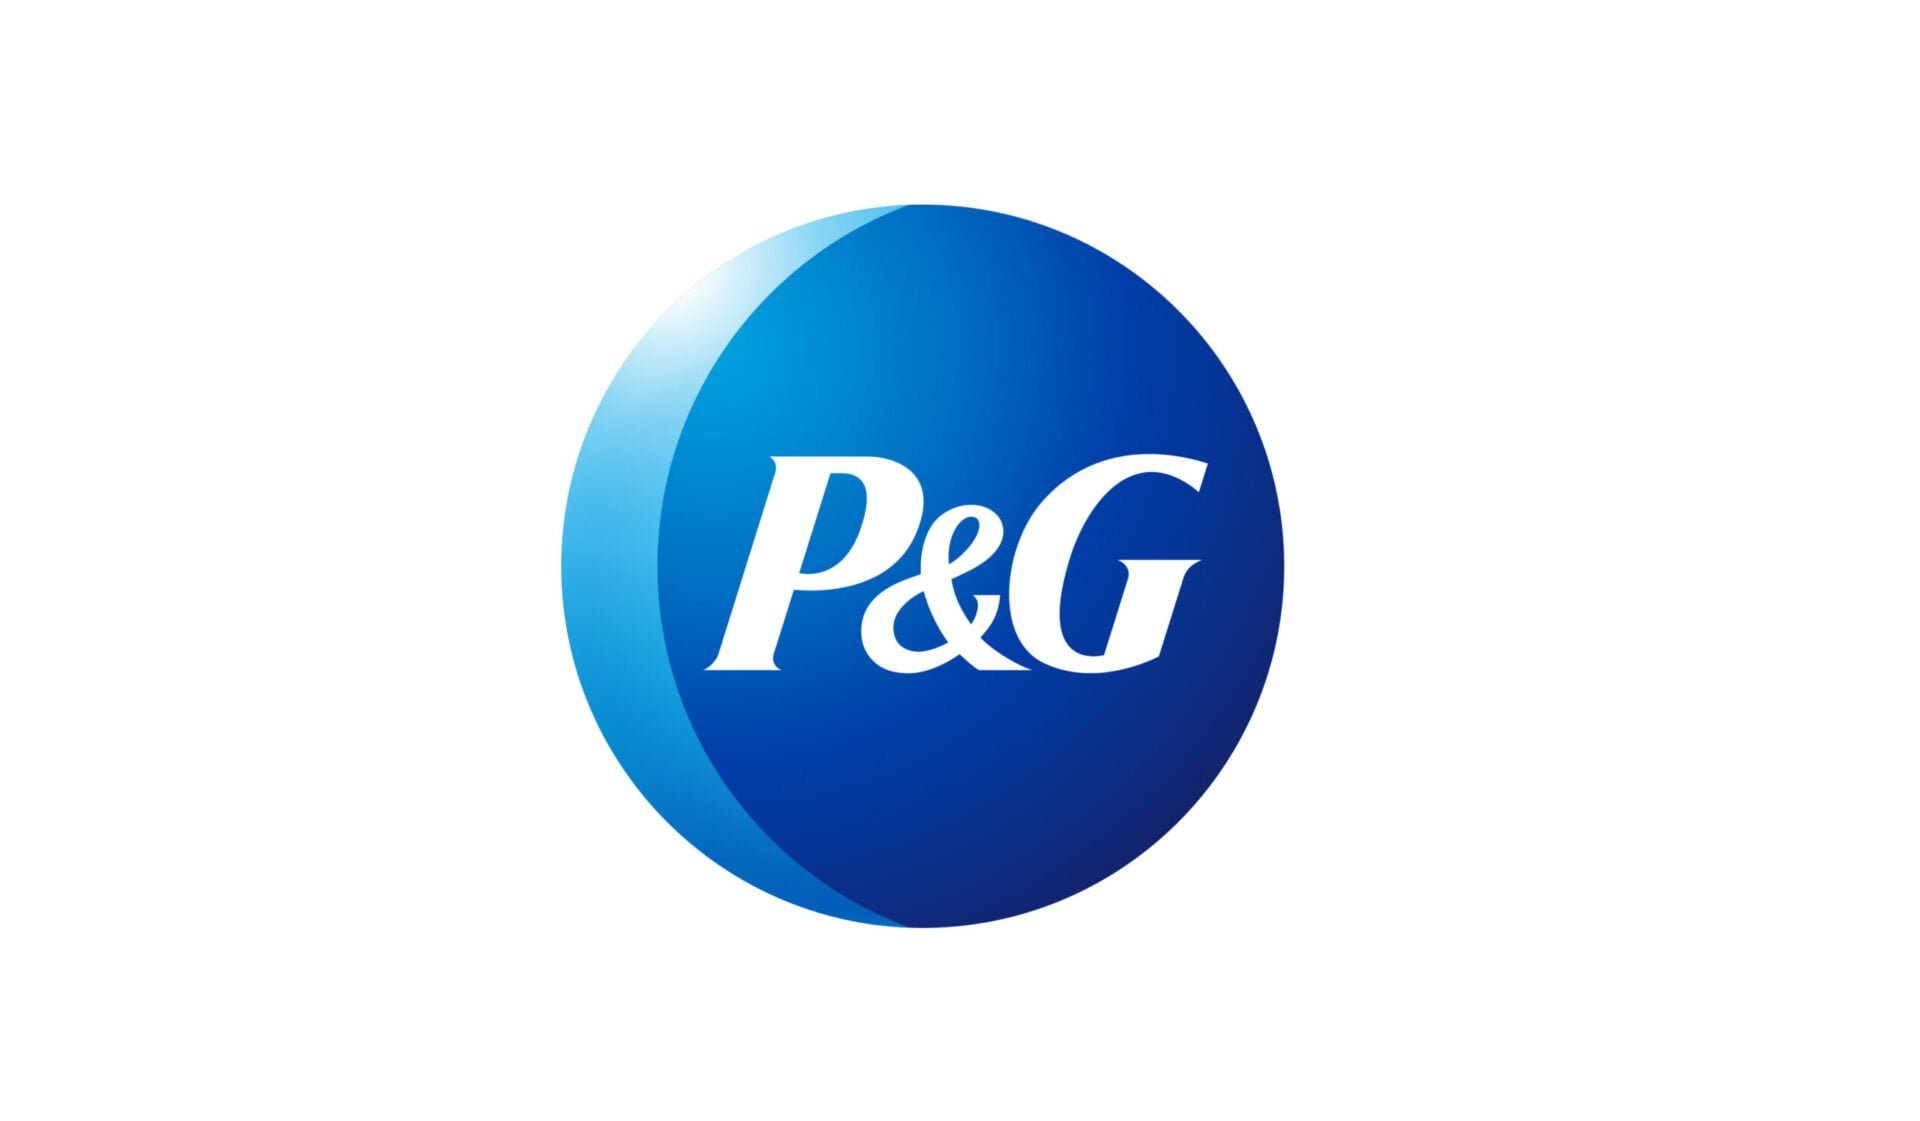 P&G logo in white text on a blue circular background